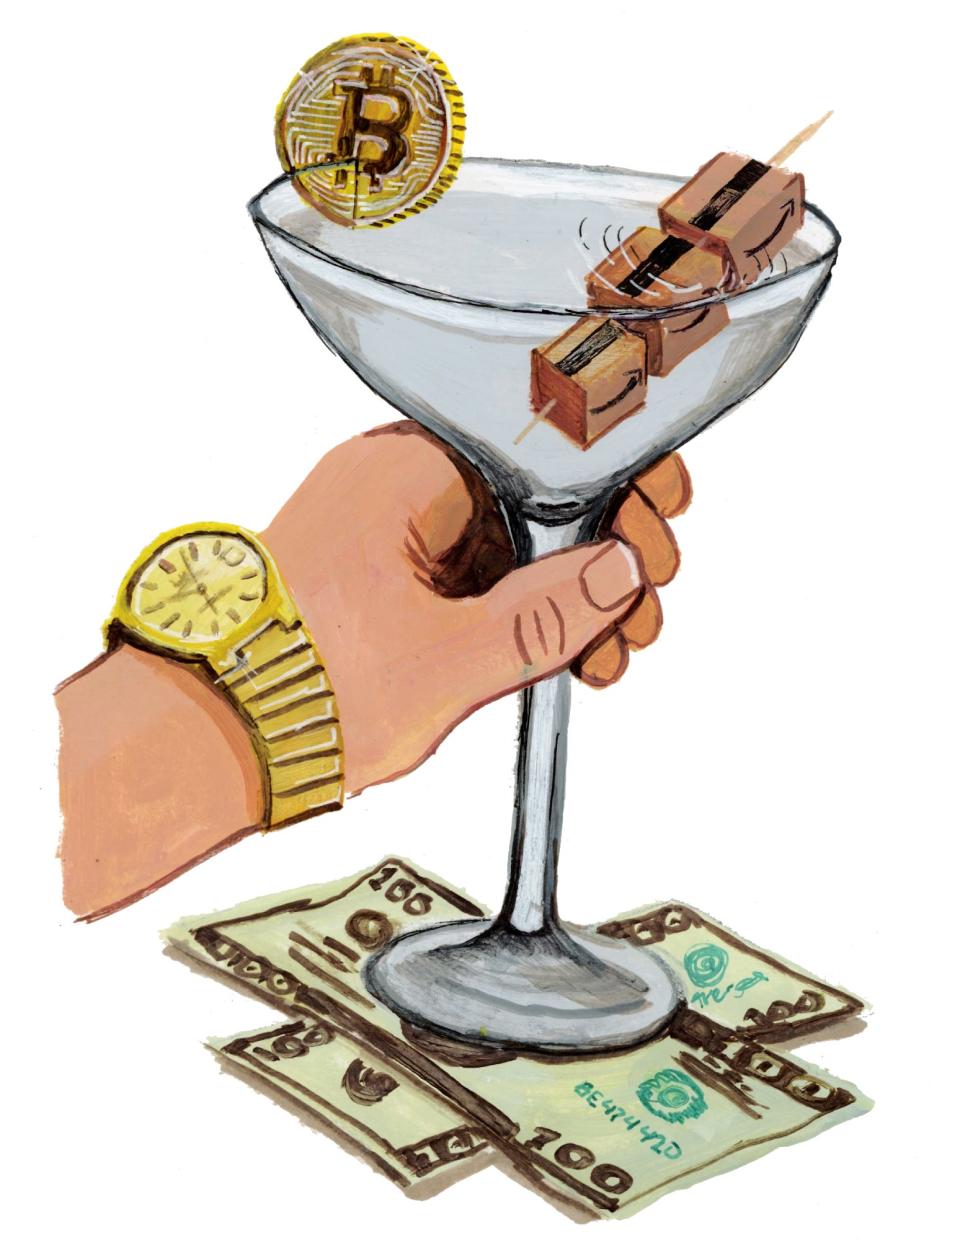 A hand holding a drink with a bitcoin garnish and money as a coaster